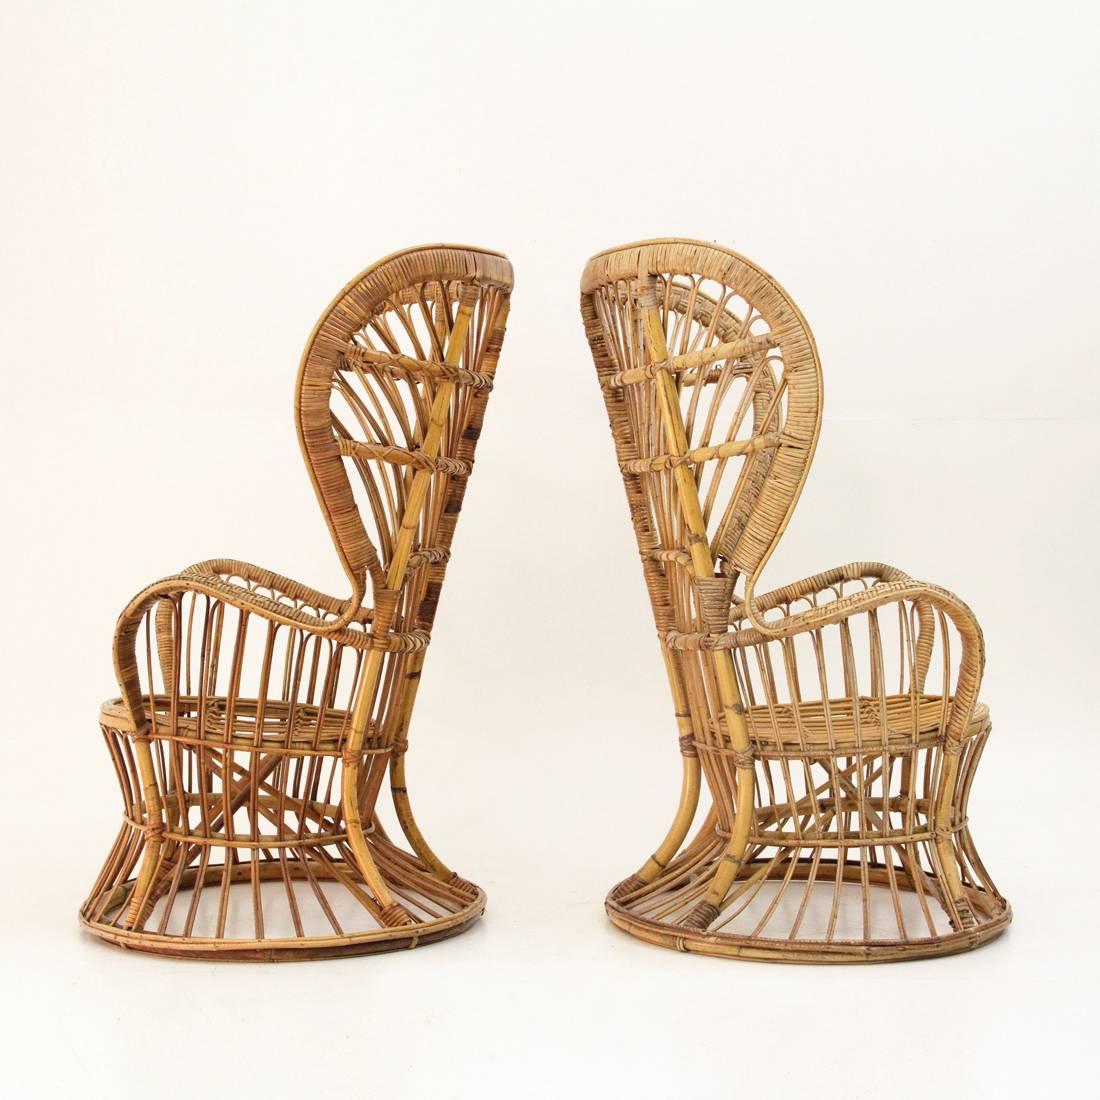 1950s rattan chair with high back seat designed by Gio Ponti and Lio Carminati and manufactured by Vittorio Bonacina & Co., Como. This chair is made from rattan cane.